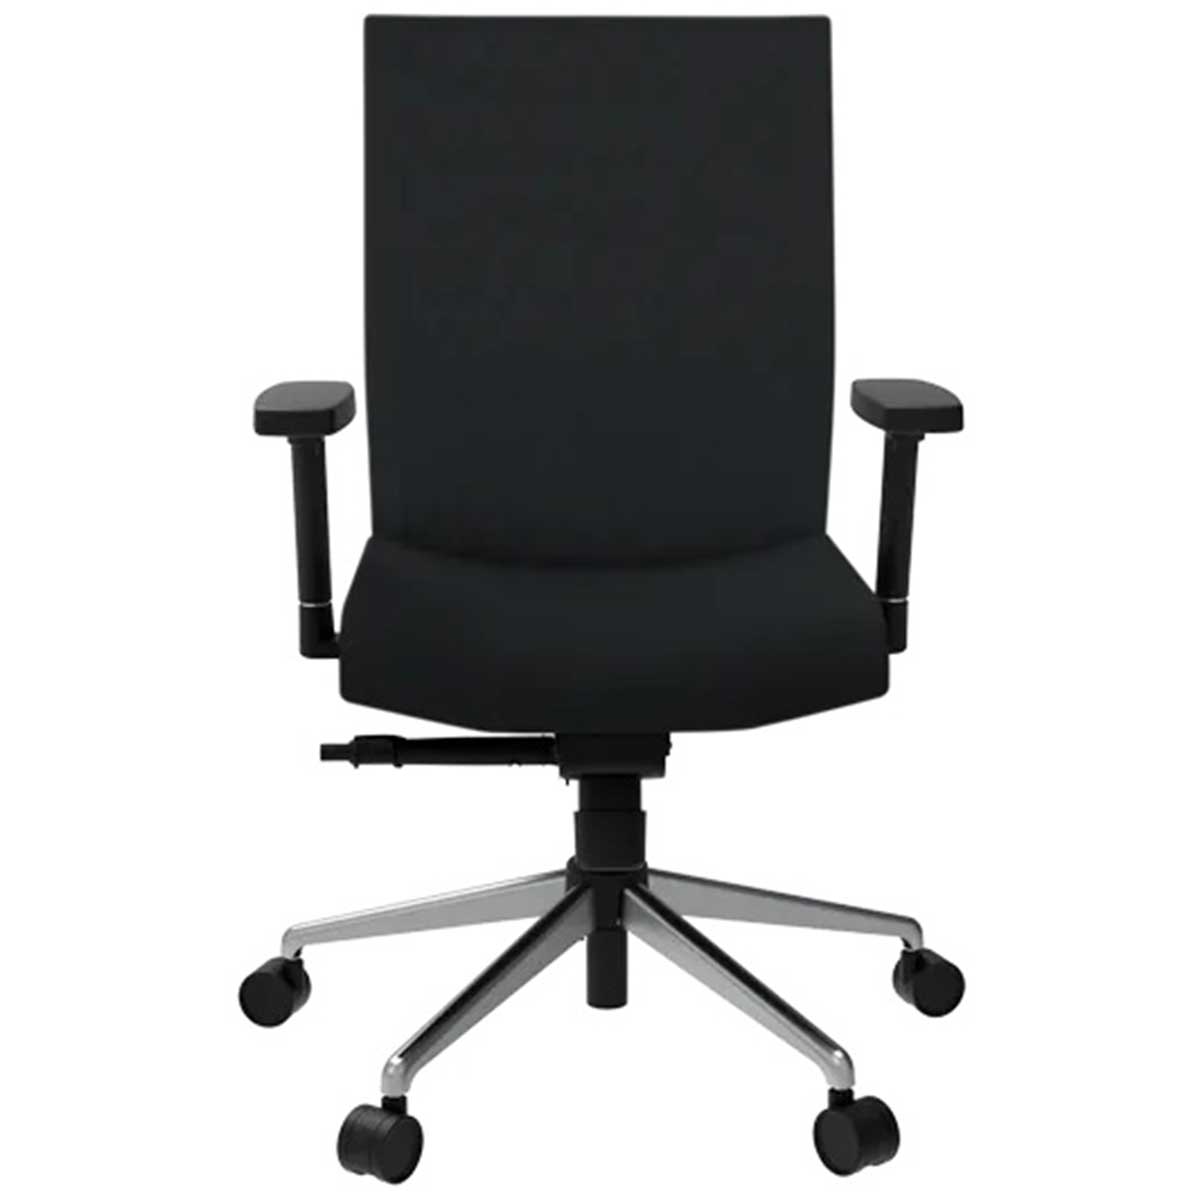 Staff Chair Manufacturers, Suppliers in Noida Sector 44